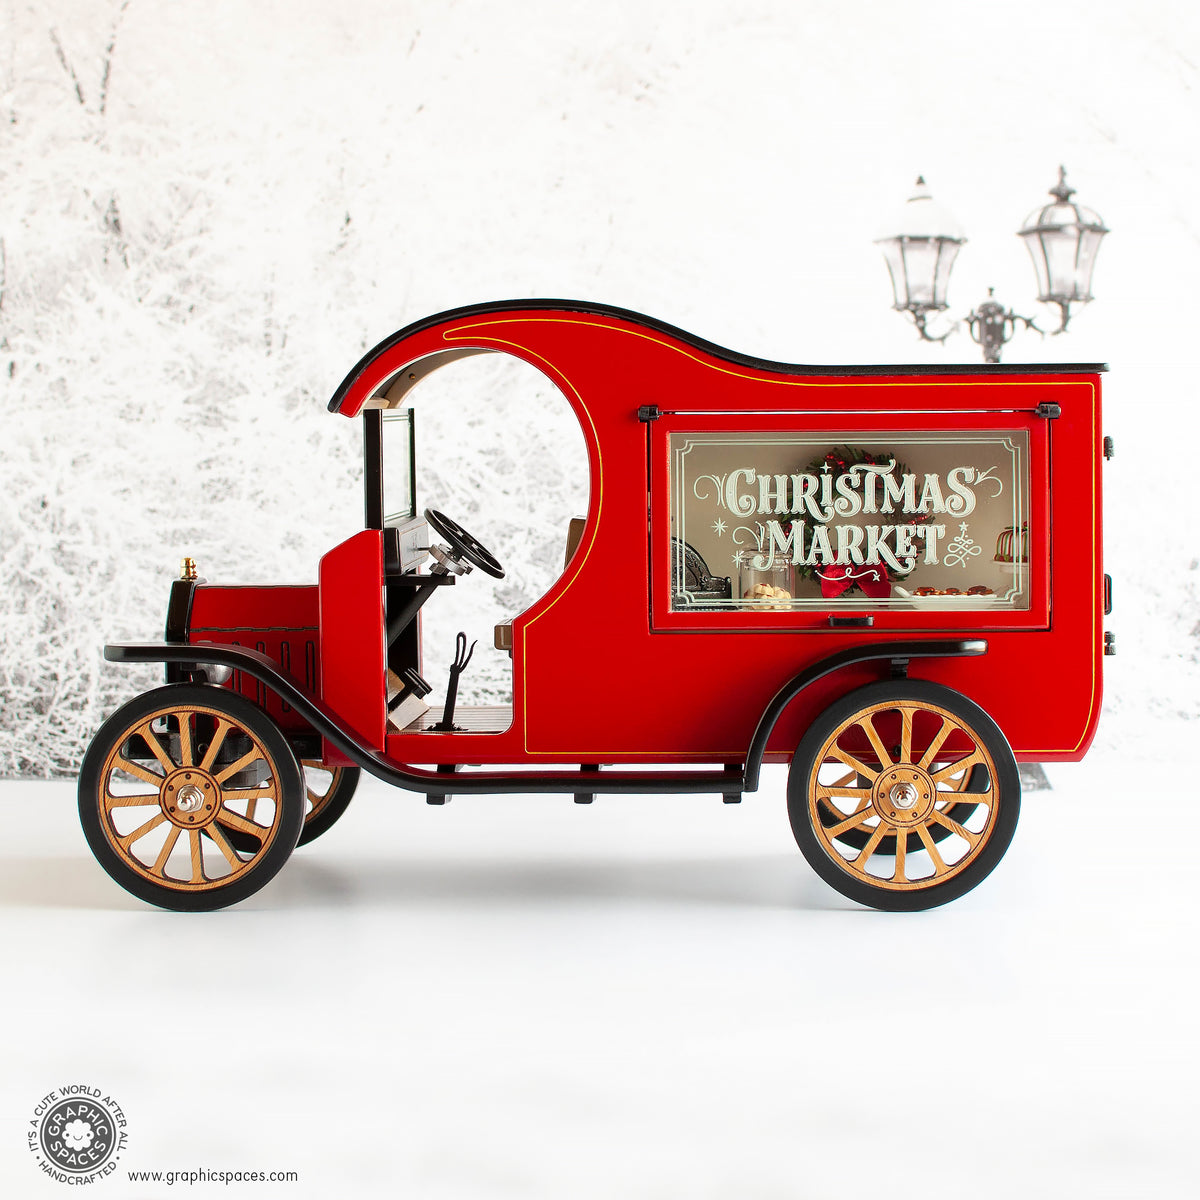 1 :12 Scale Room Box Red Christmas Market Truck Model T C cab. Driver side view of Counter display with window closed.